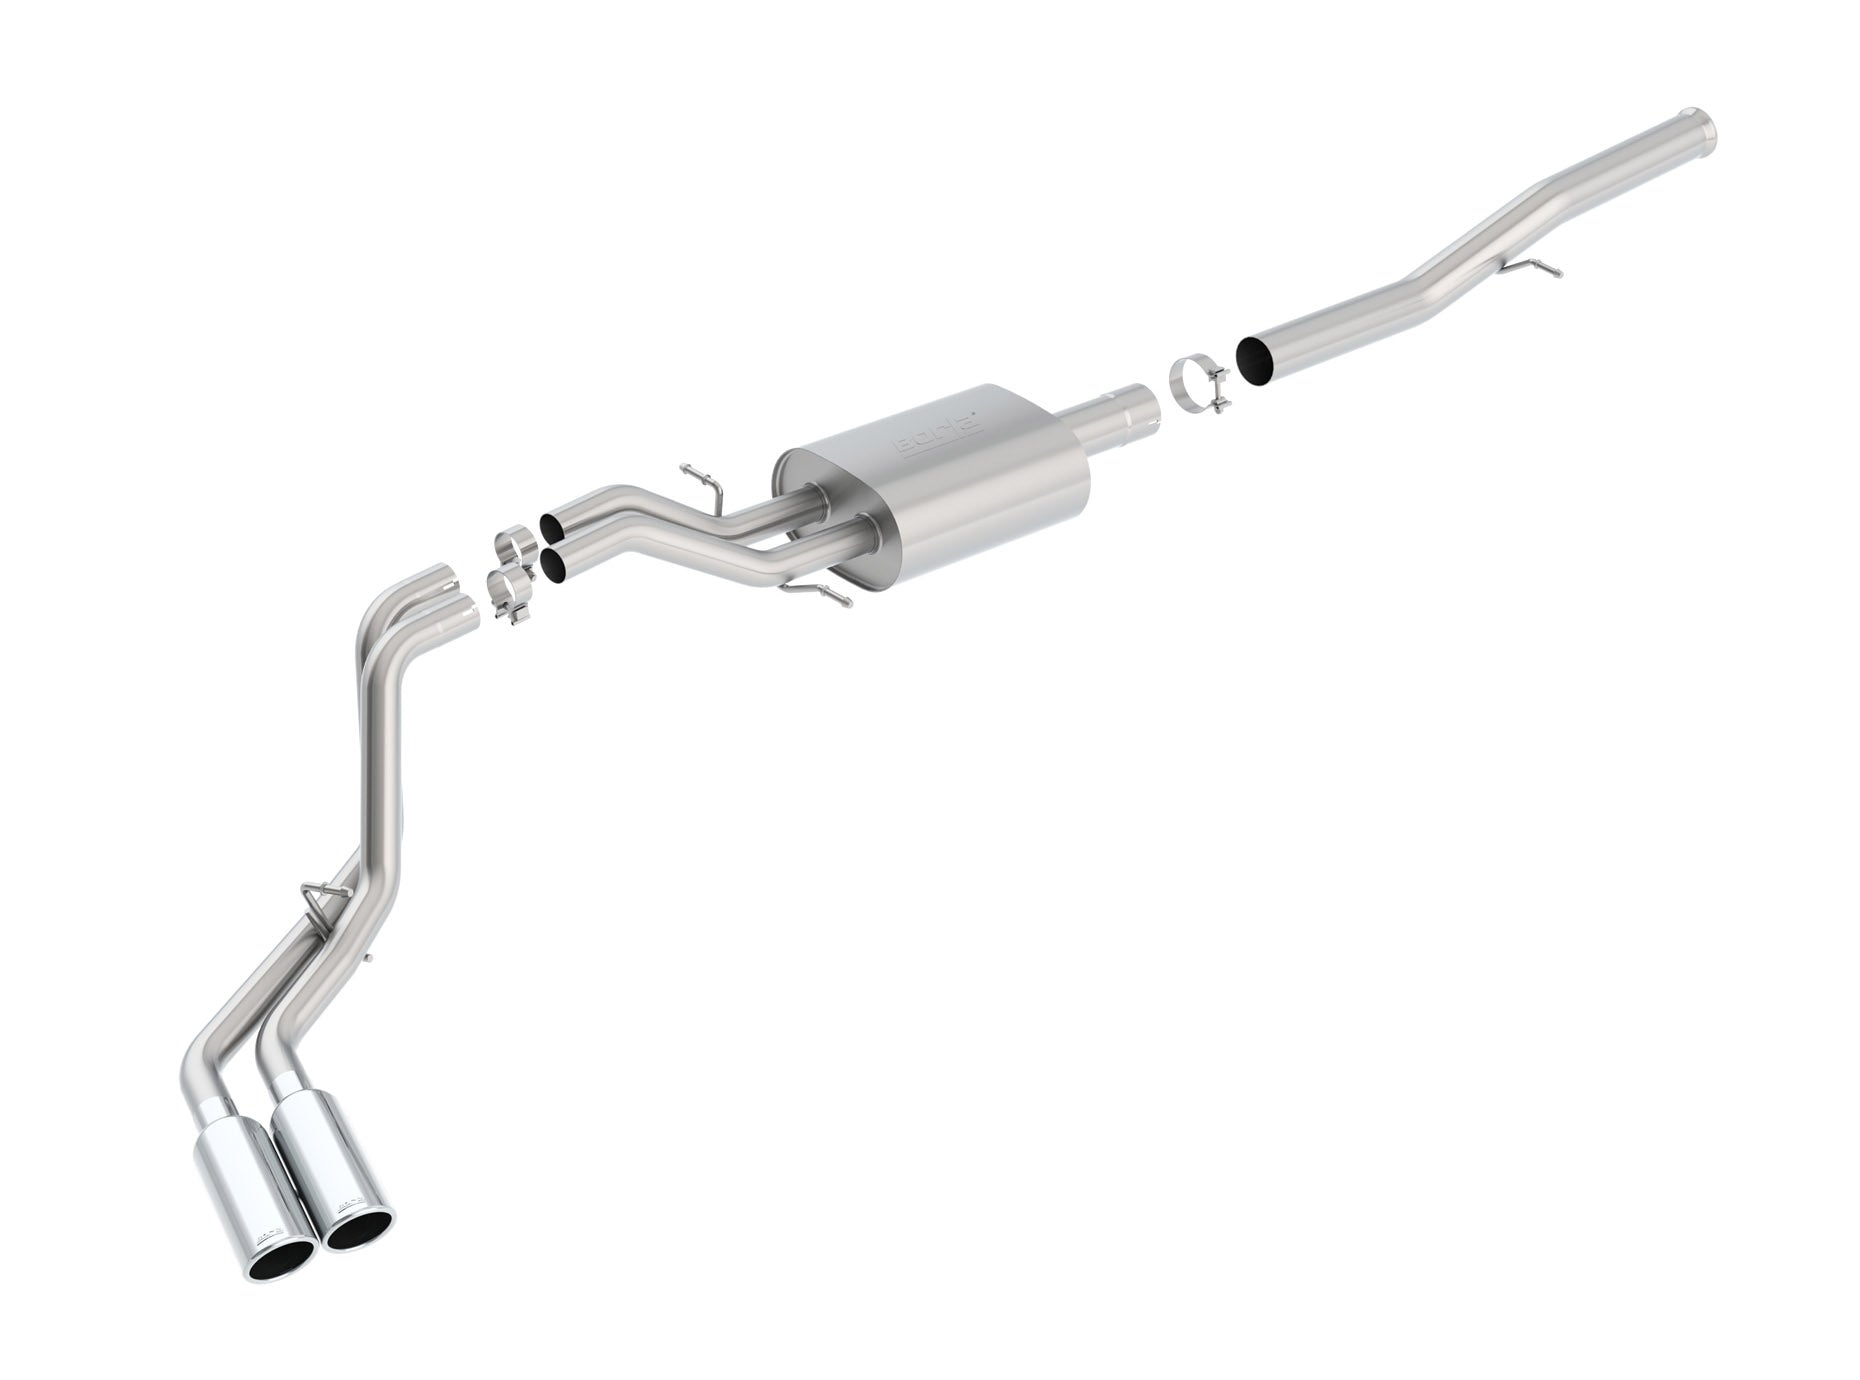 BORLA 140576 Cat Back Exhaust System, Silverado / Sierra V8-6.2L, Ext. Cab Standard Bed (78.7") Crew Cab Short Bed (69.3") 143.5" WB, Tip №18, 2014-16, sound S-Type Photo-1 